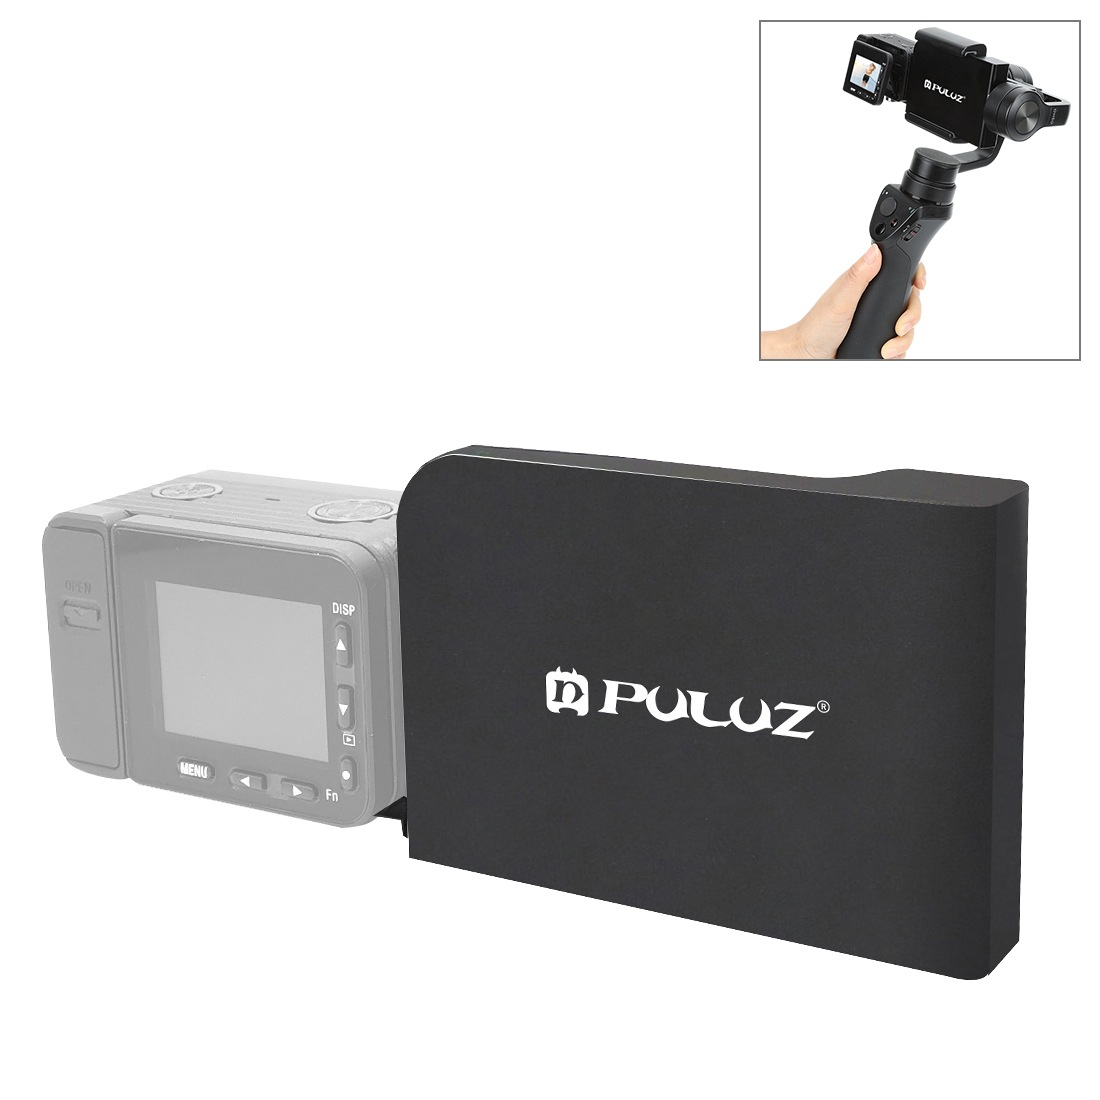 PULUZ Mobile Phone Gimbal Switch Mount Plate Adapter for Sony RX0 II Handheld Phone Gimbal Camera Accessories black